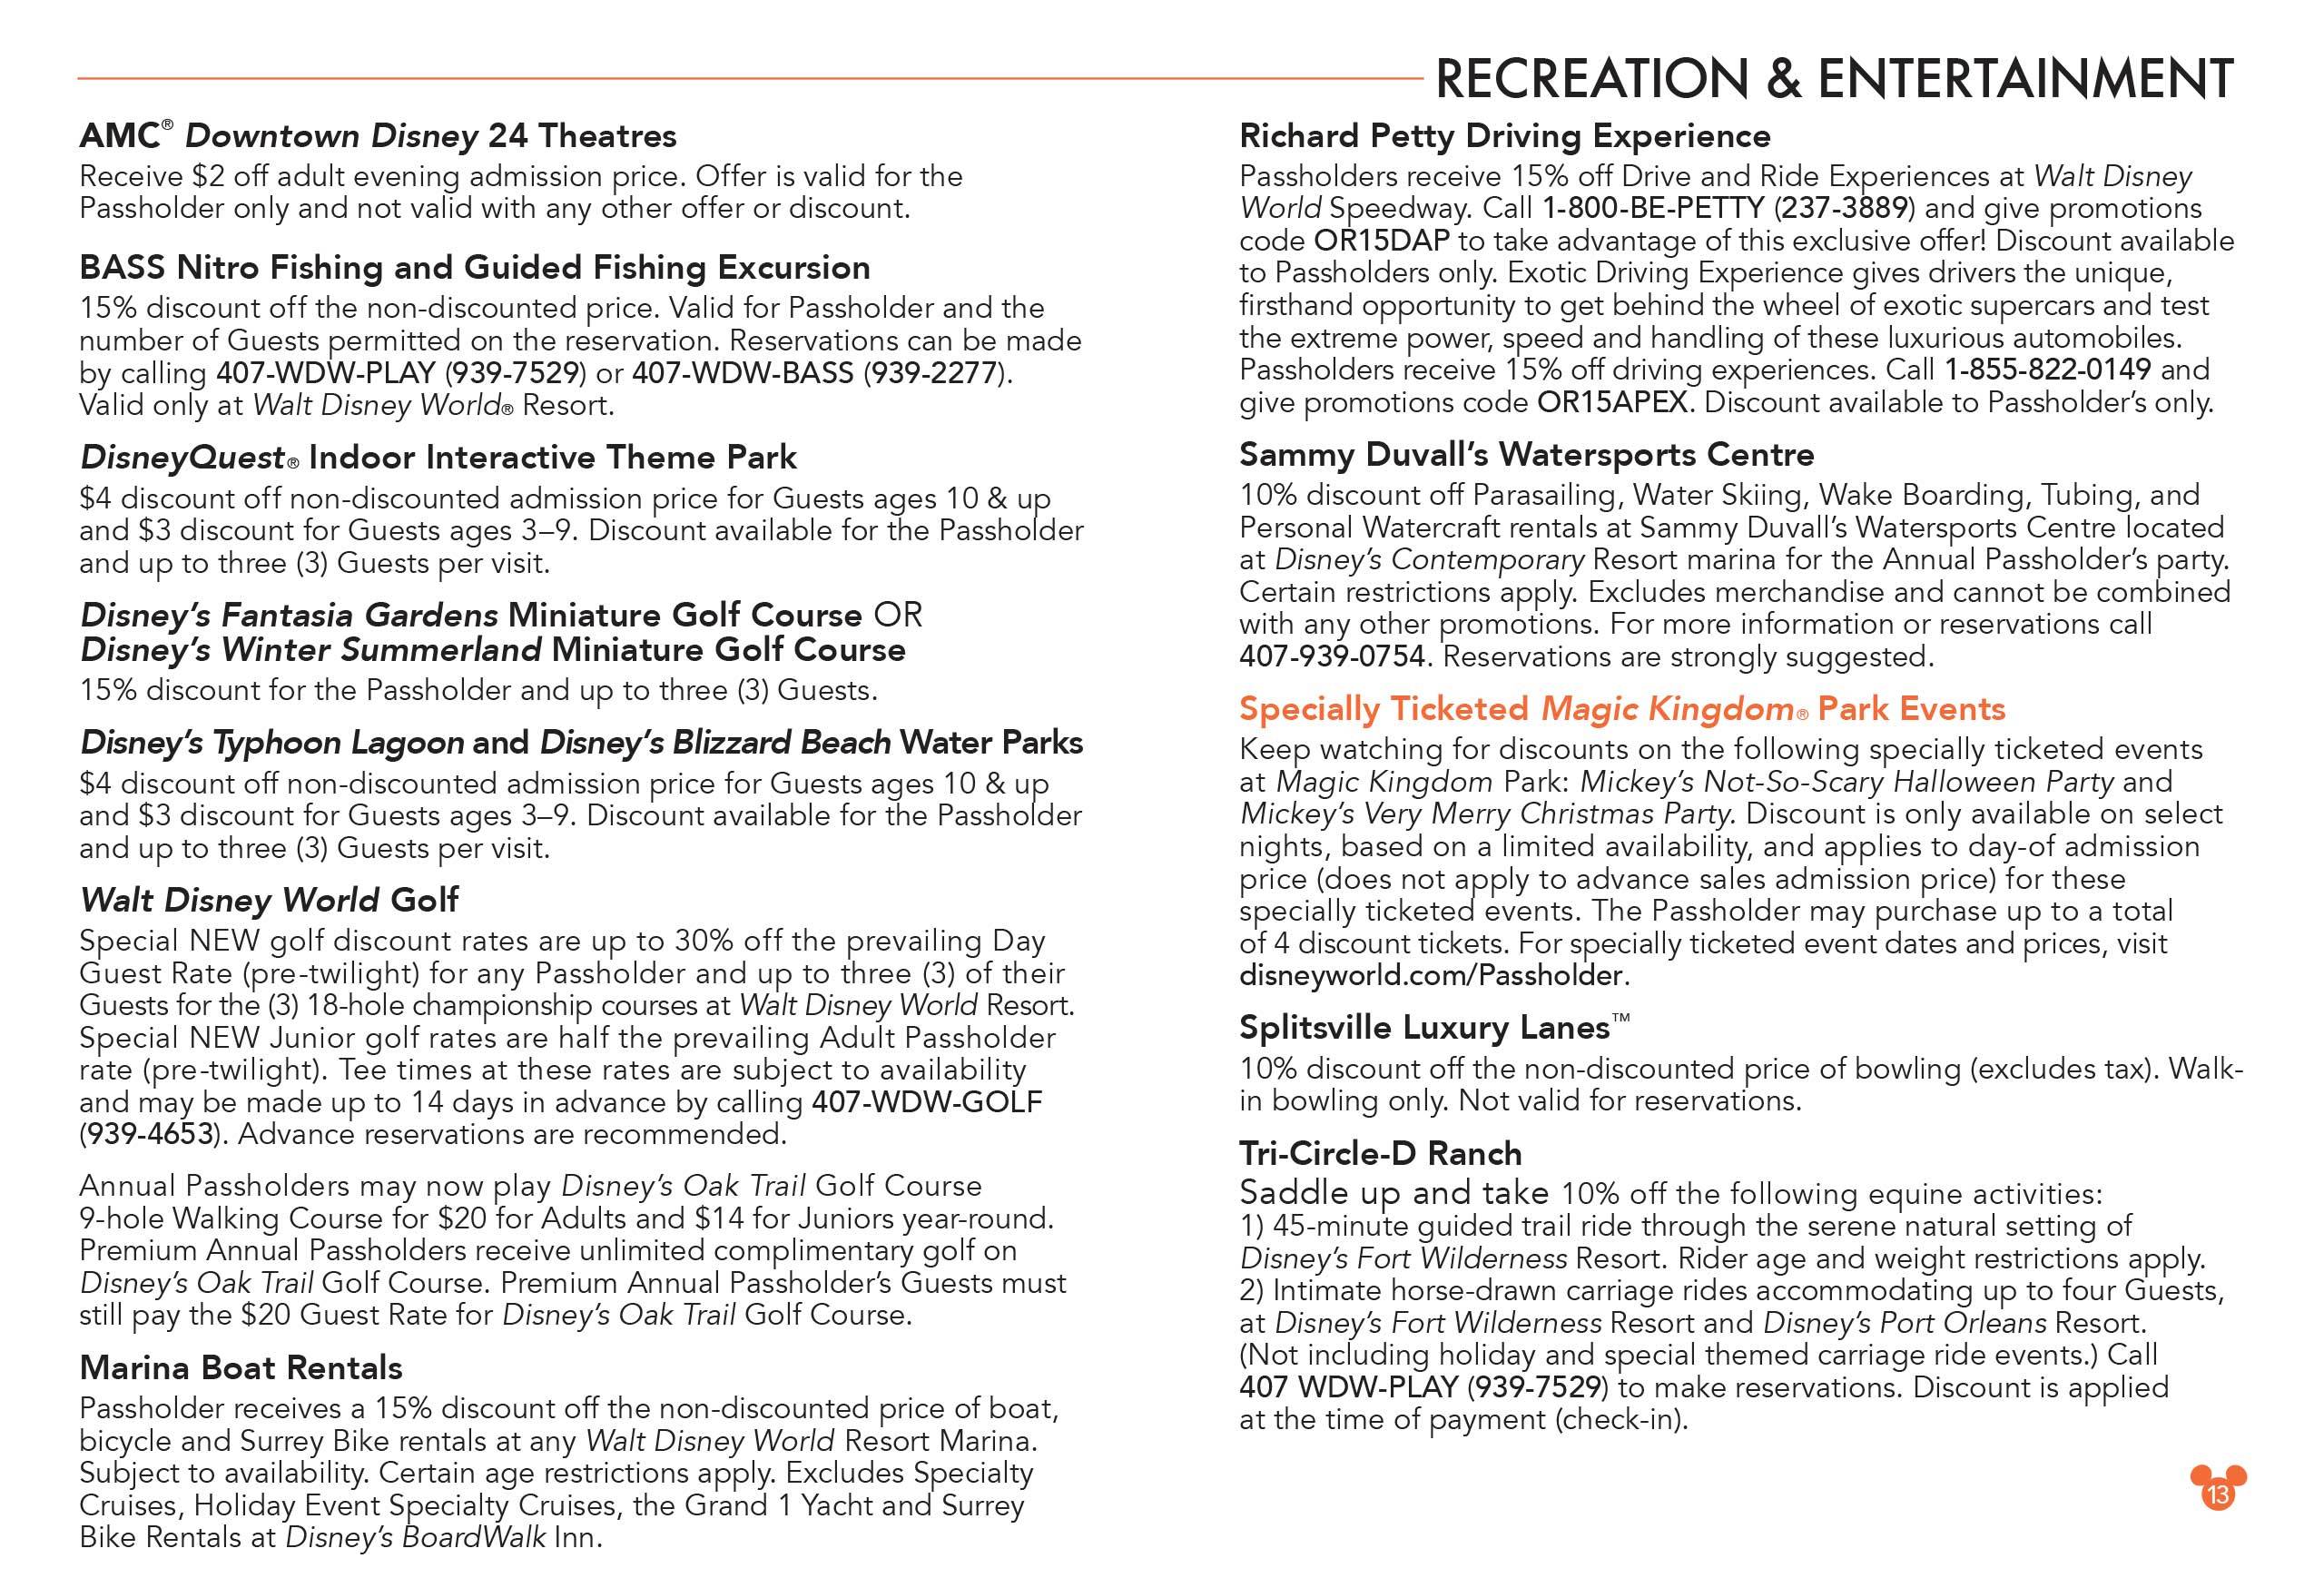 2015 Passholder Benefits Guide - Page 12-13